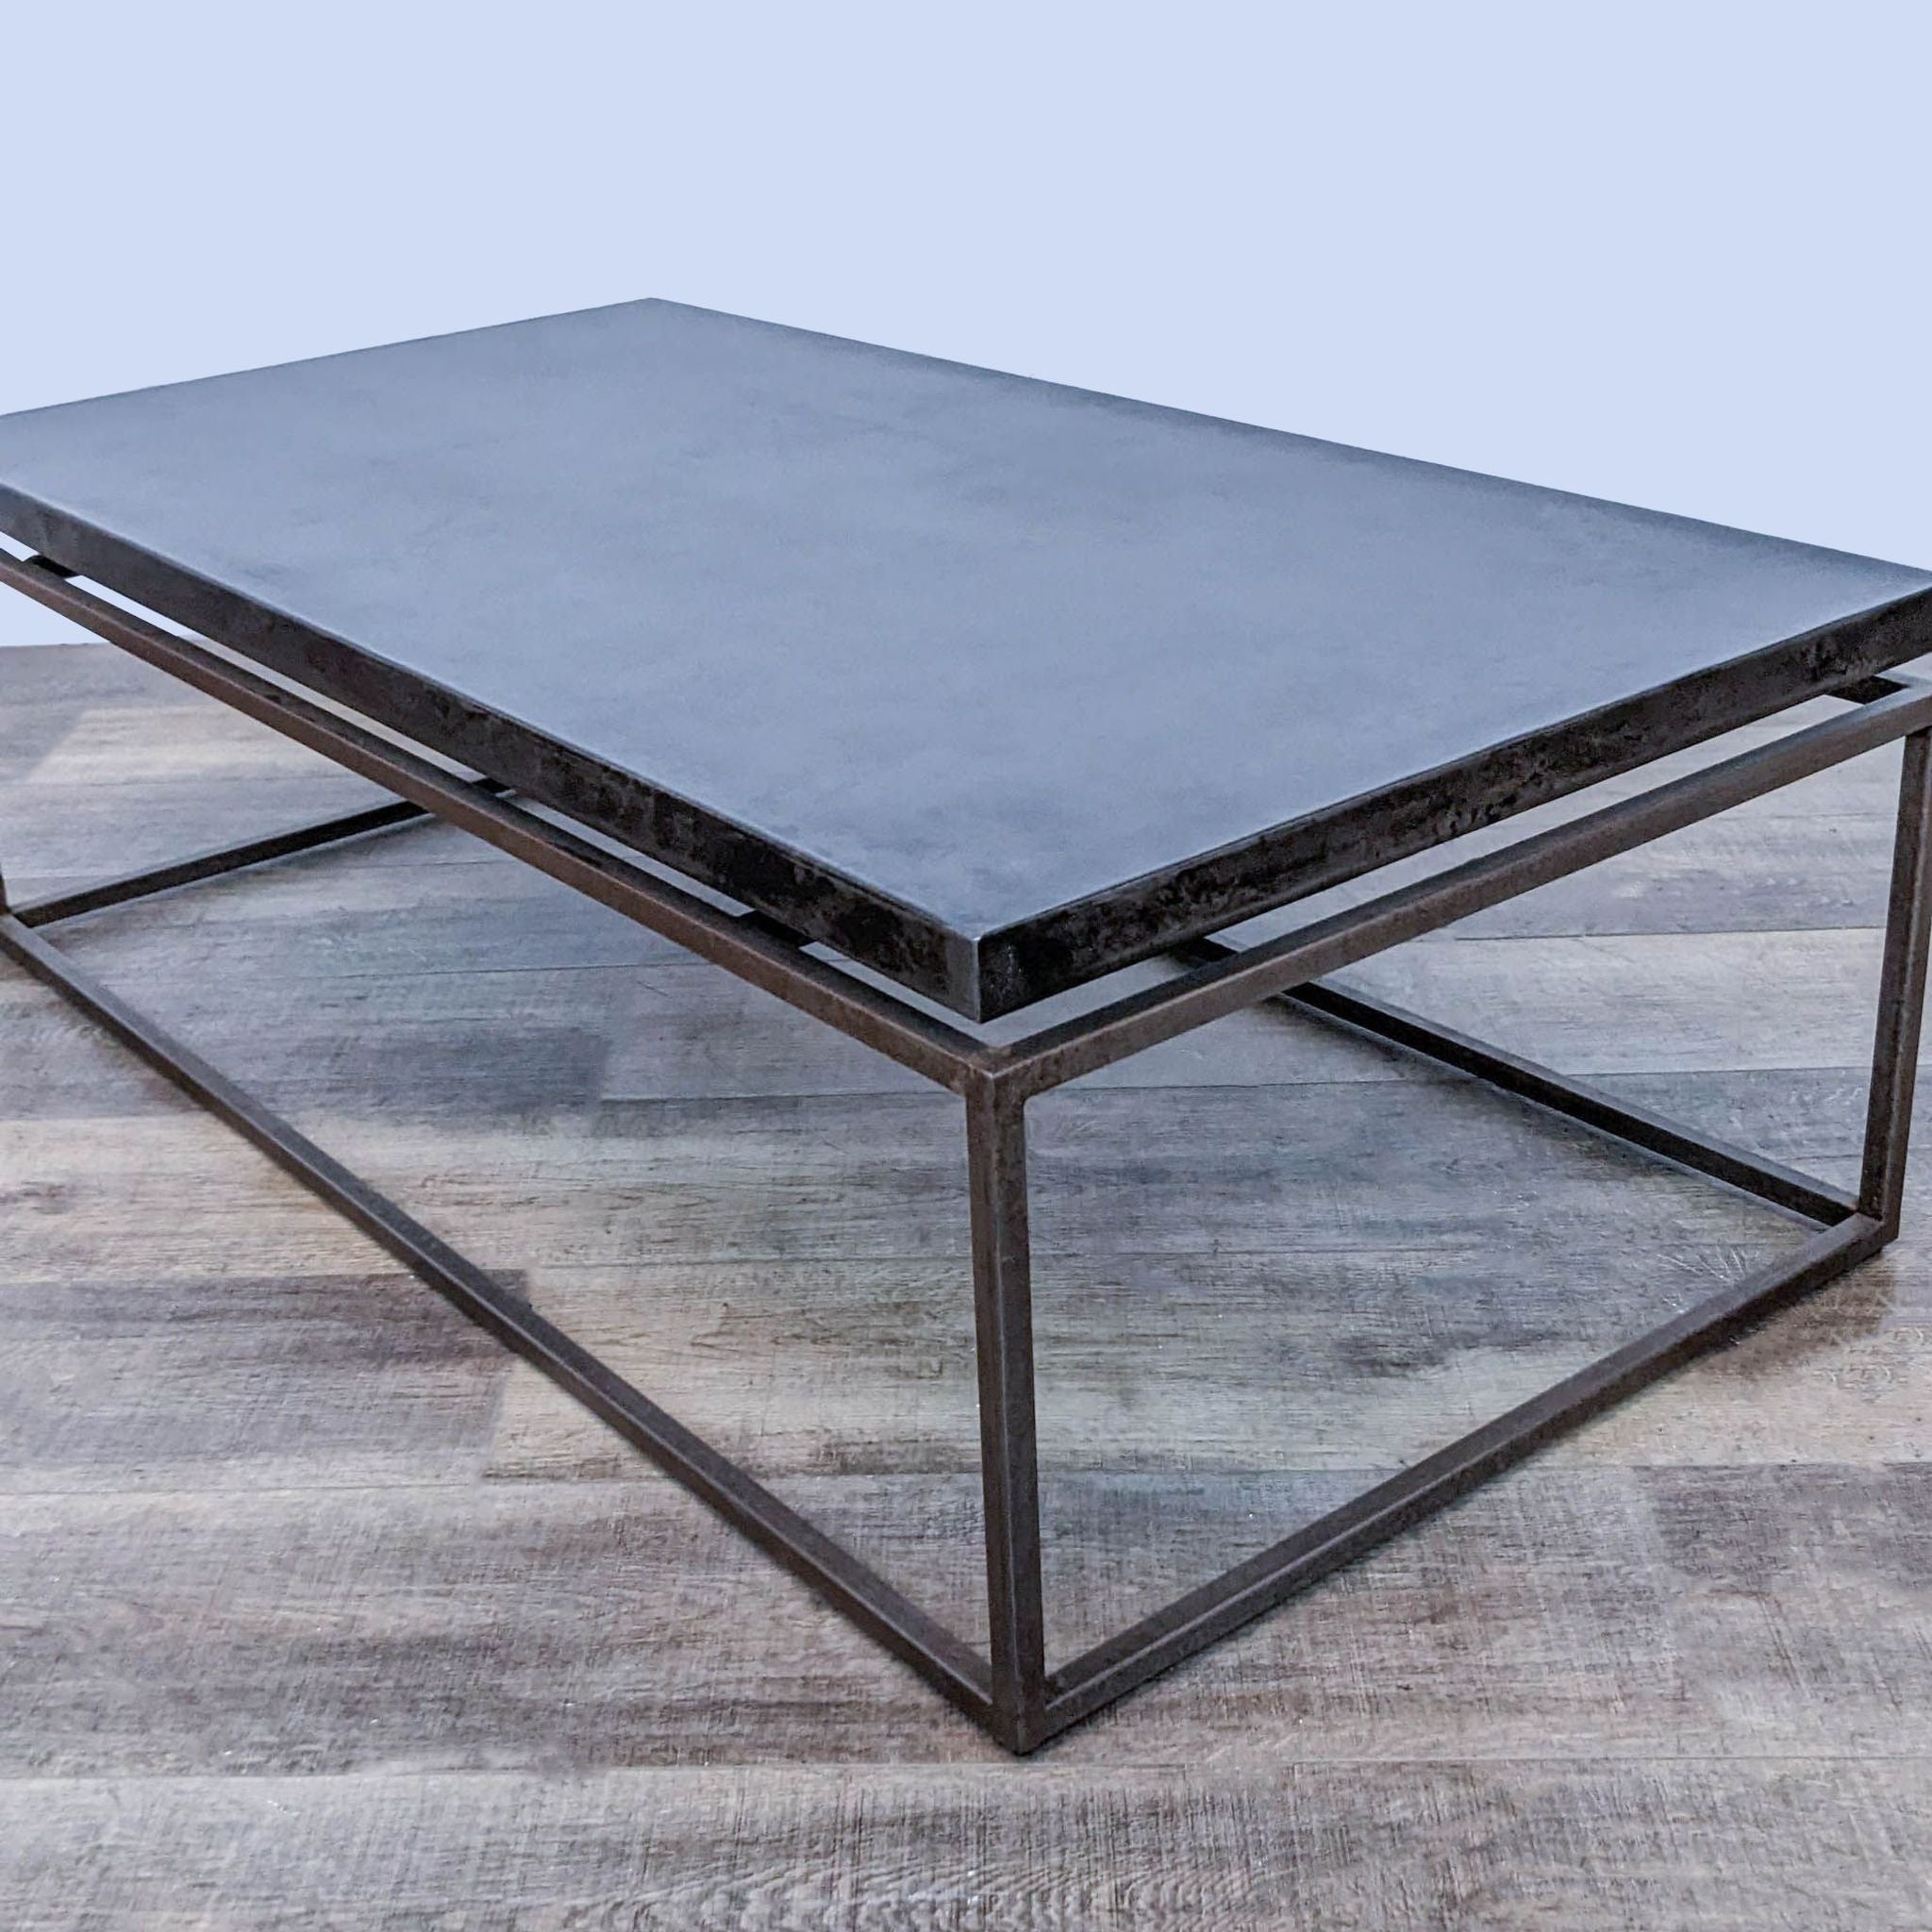 Reperch brand metal coffee table with a "suspended" top on geometric base on a wooden floor.